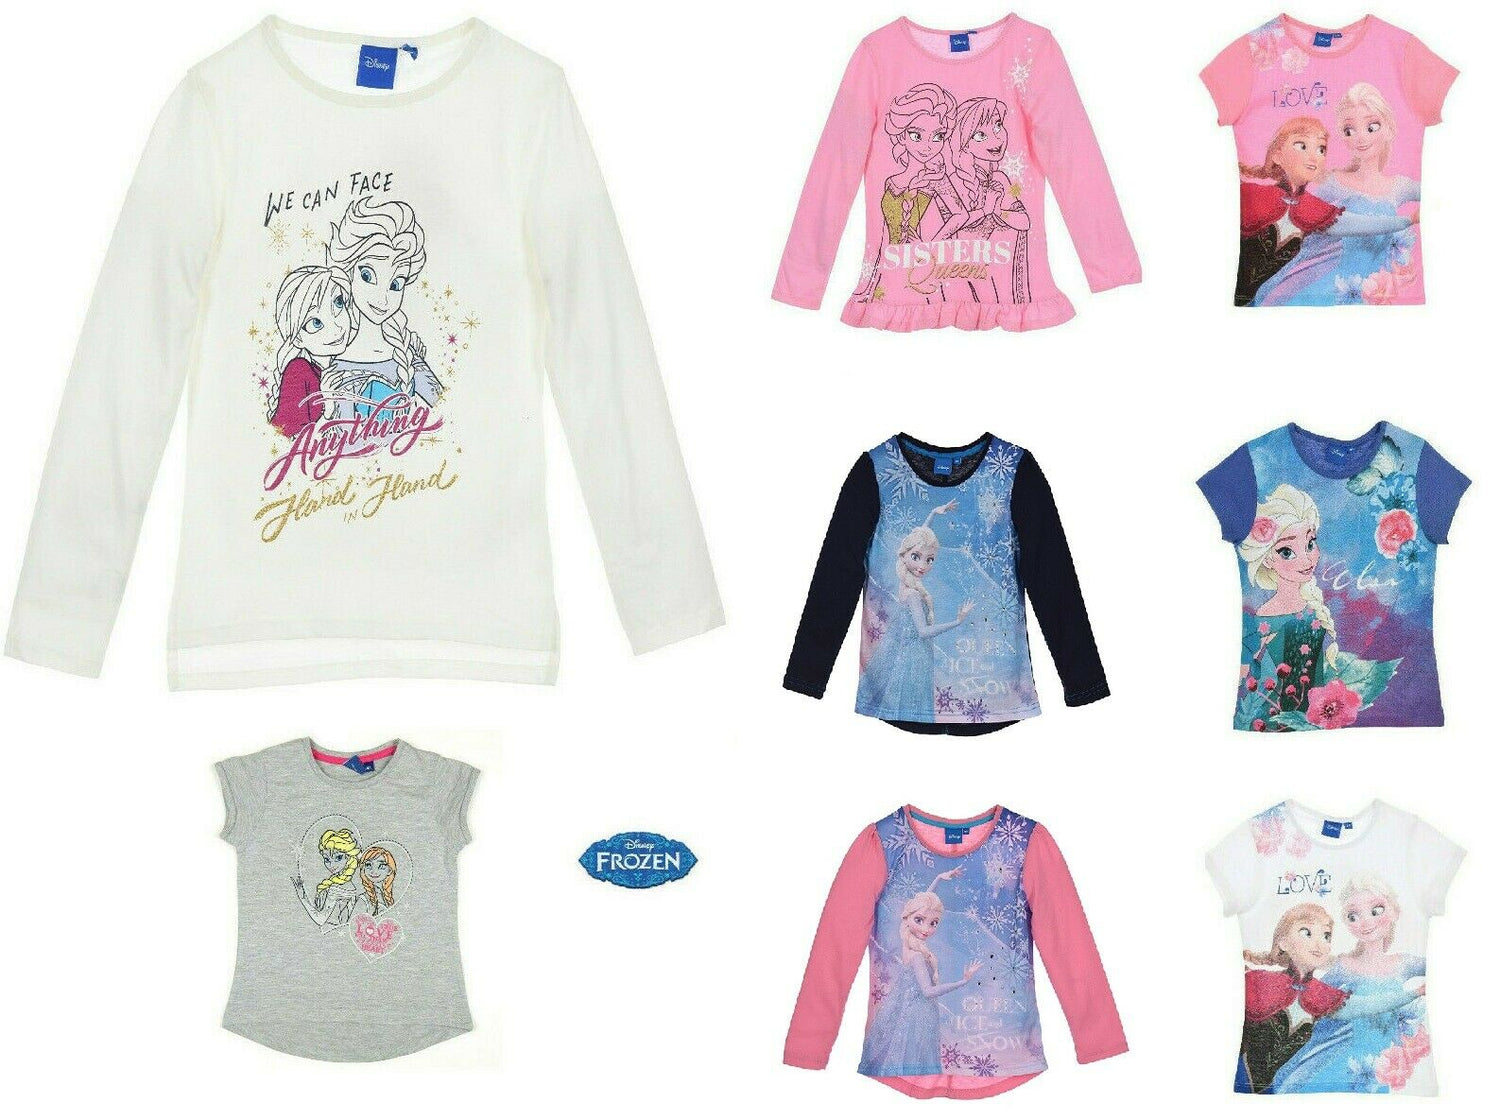 Children's Frozen T-Shirts In Long & Short Sleeve. Ages 3-8. Perfect For Any Frozen Fan. These Are Official Merchandise